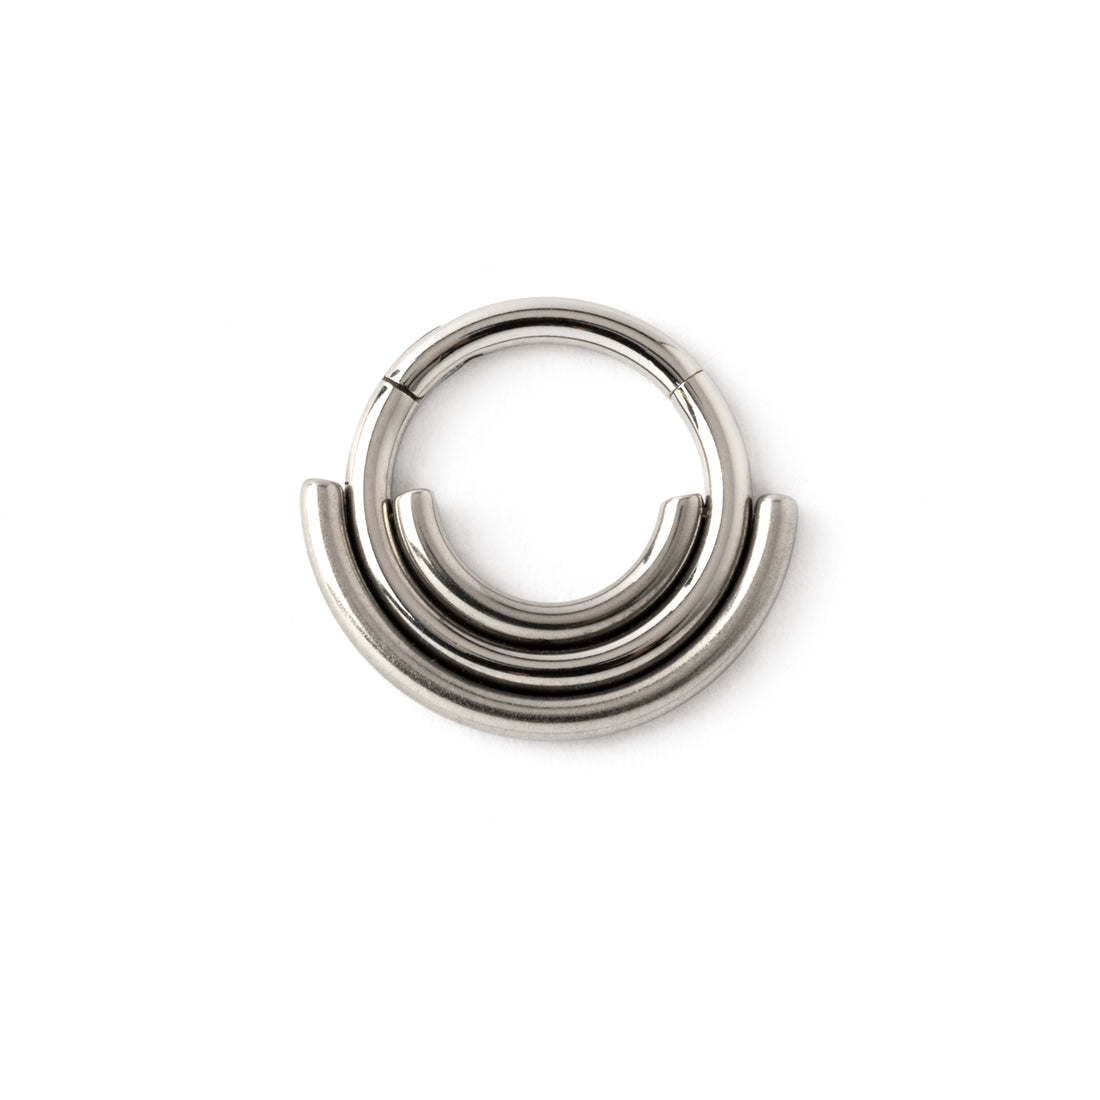 Akasha surgical steel multiple rings septum clicker frontal view